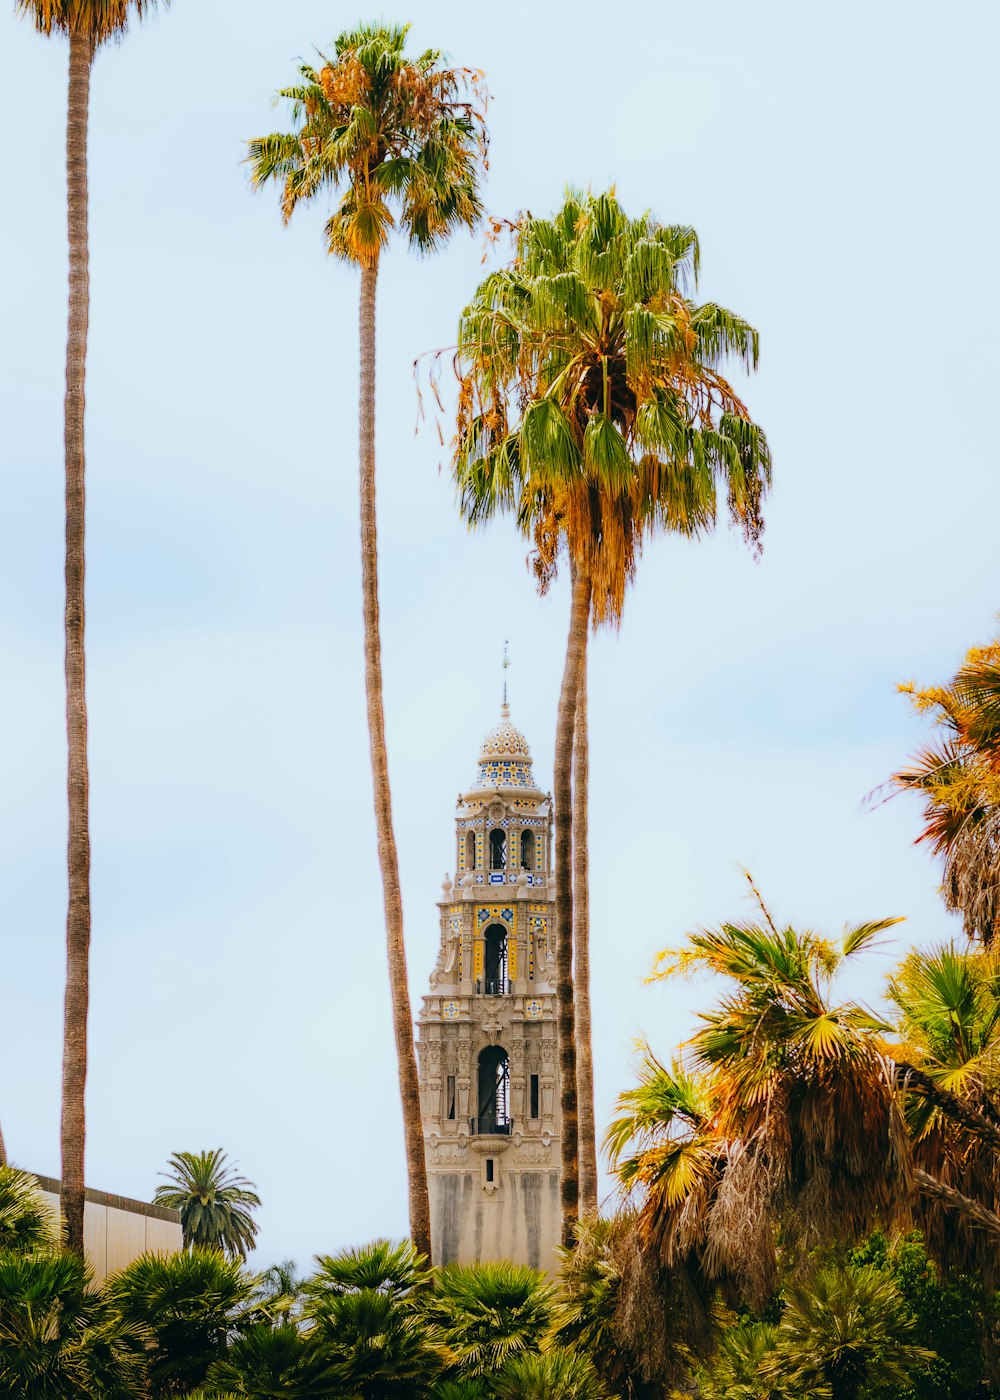 a tall clock tower surrounded by palm trees